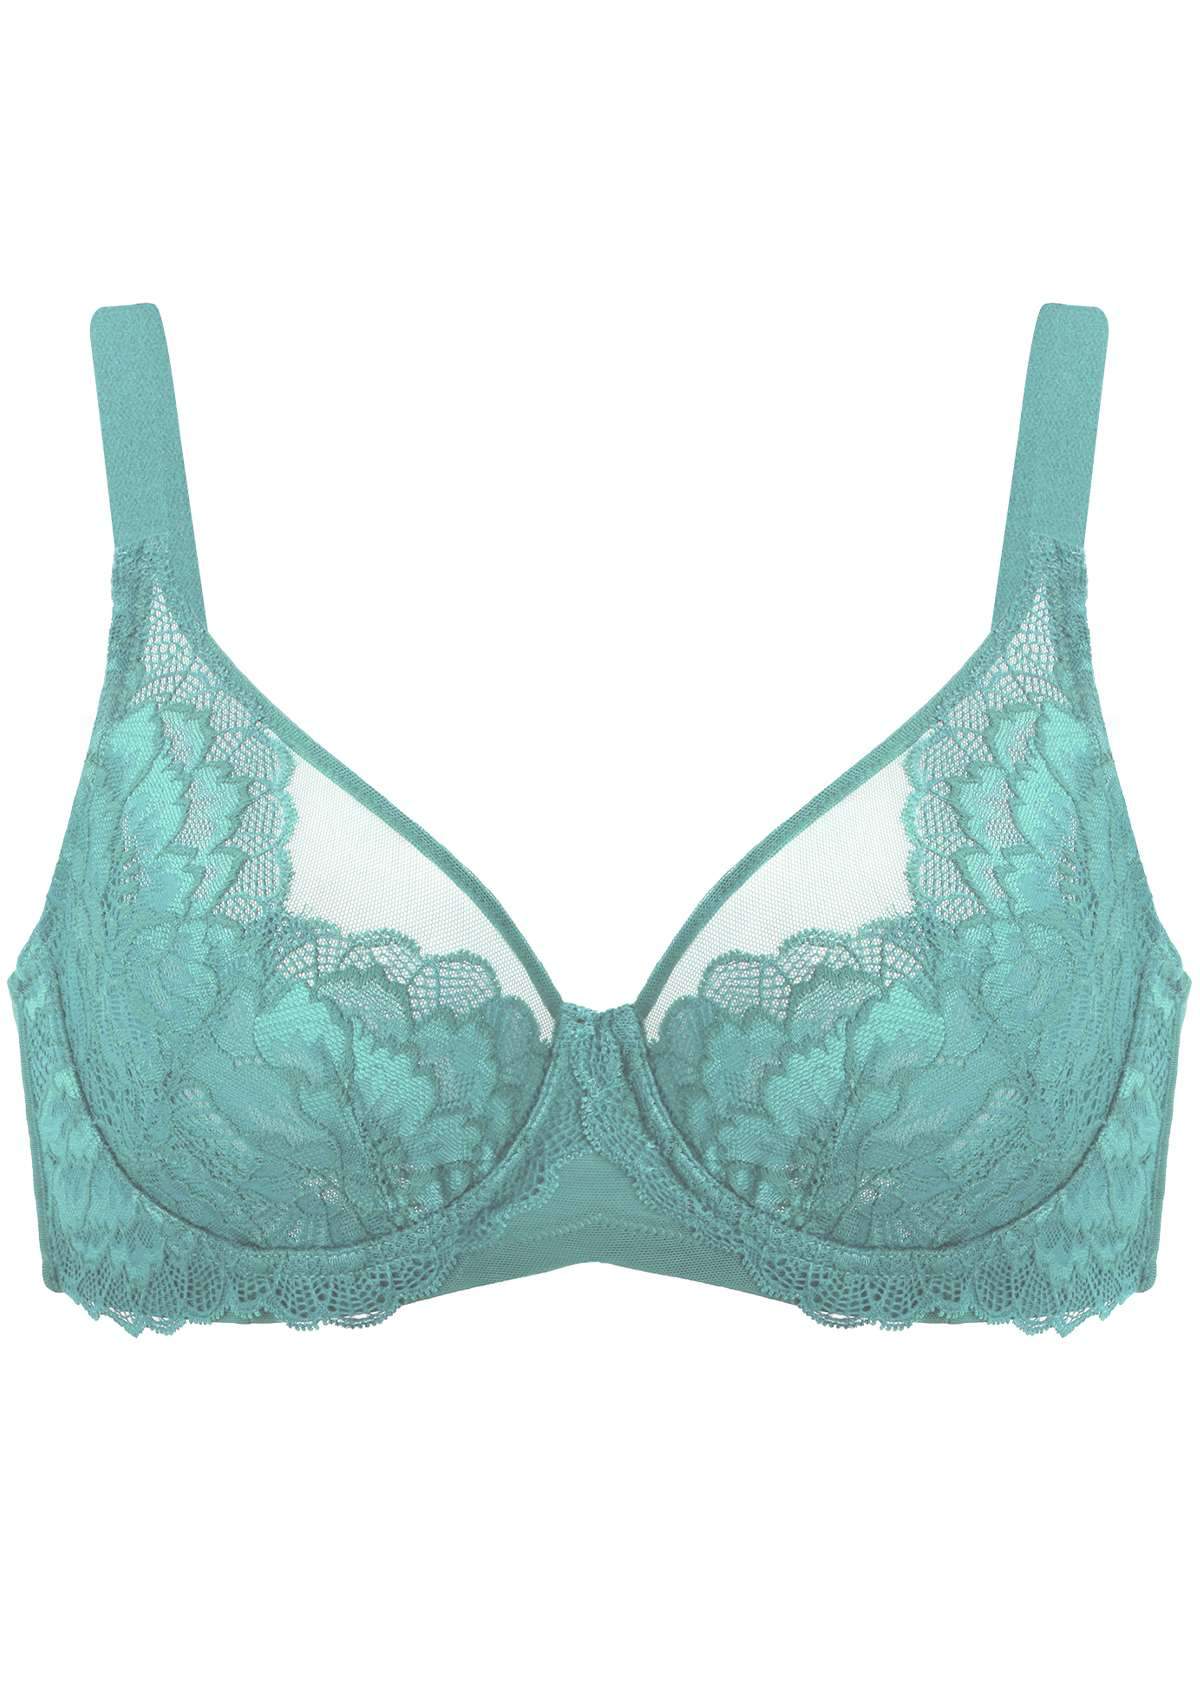 HSIA Paeonia Lace Full Coverage Underwire Non-Padded Uplifting Bra - Light Coral / 40 / DDD/F